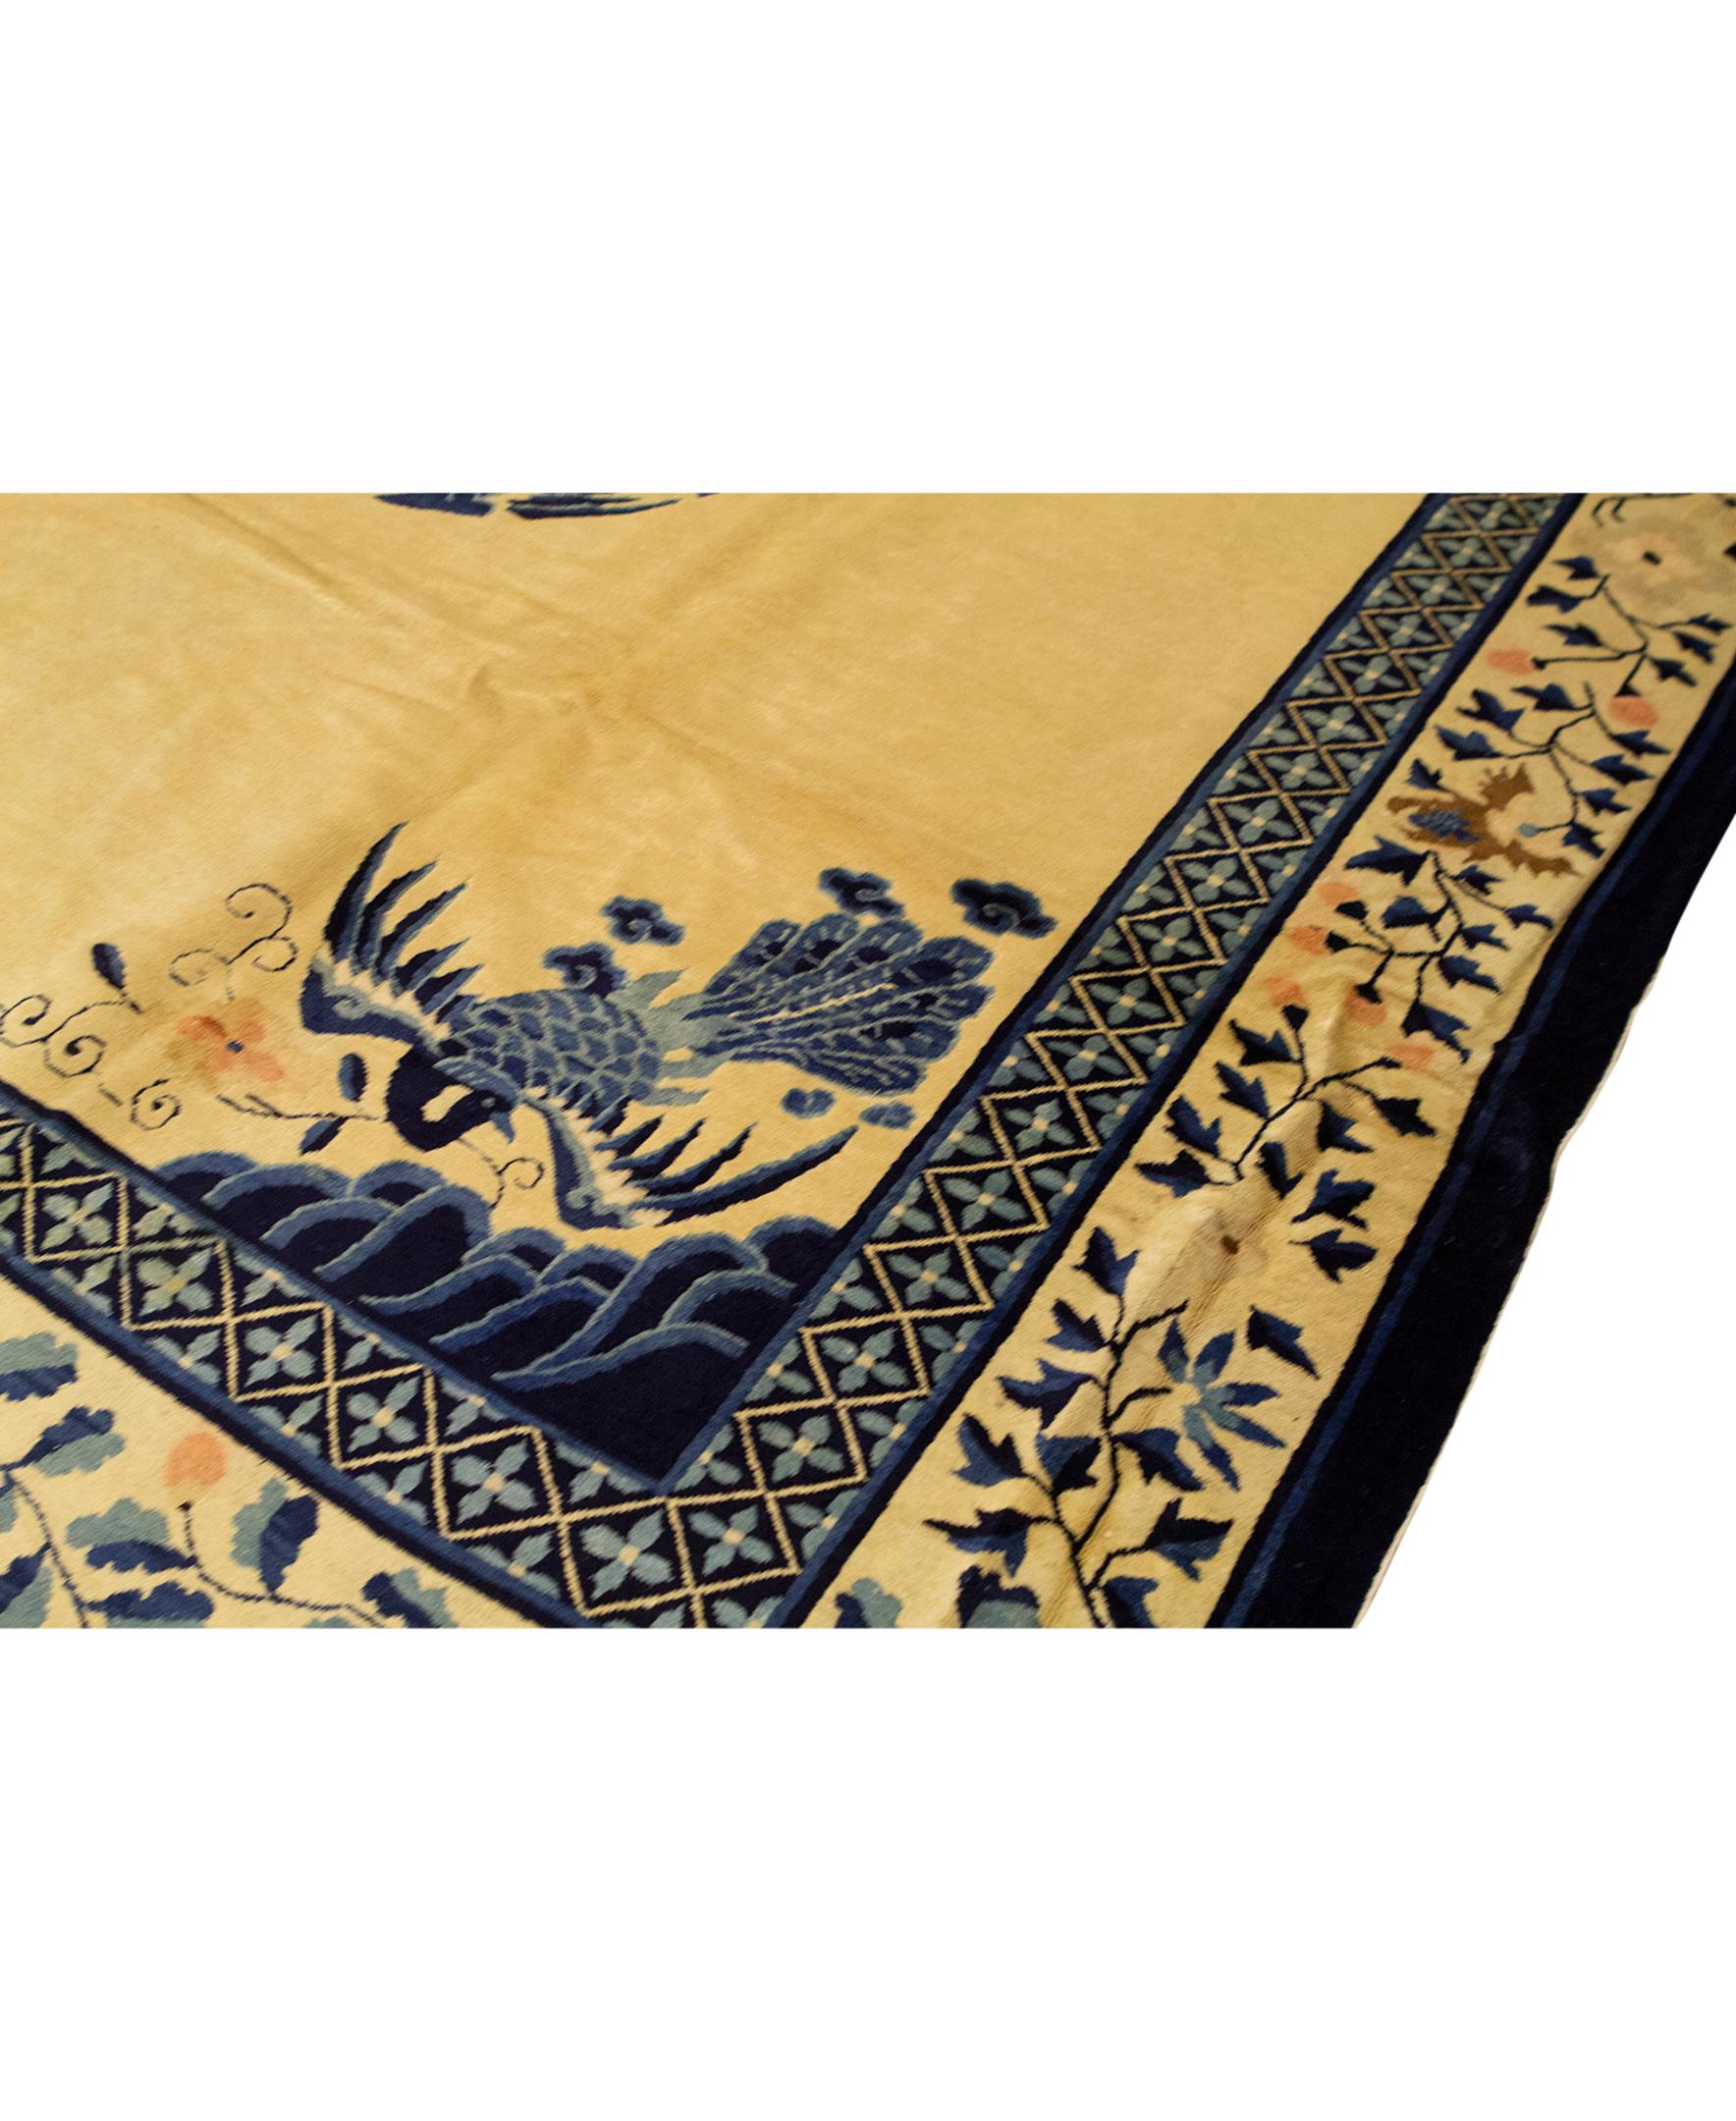 This elegantly hand woven rug is from China and woven from the finest wools to create a soft and luxurious piece that will work well in so many different settings Size: 10'-2